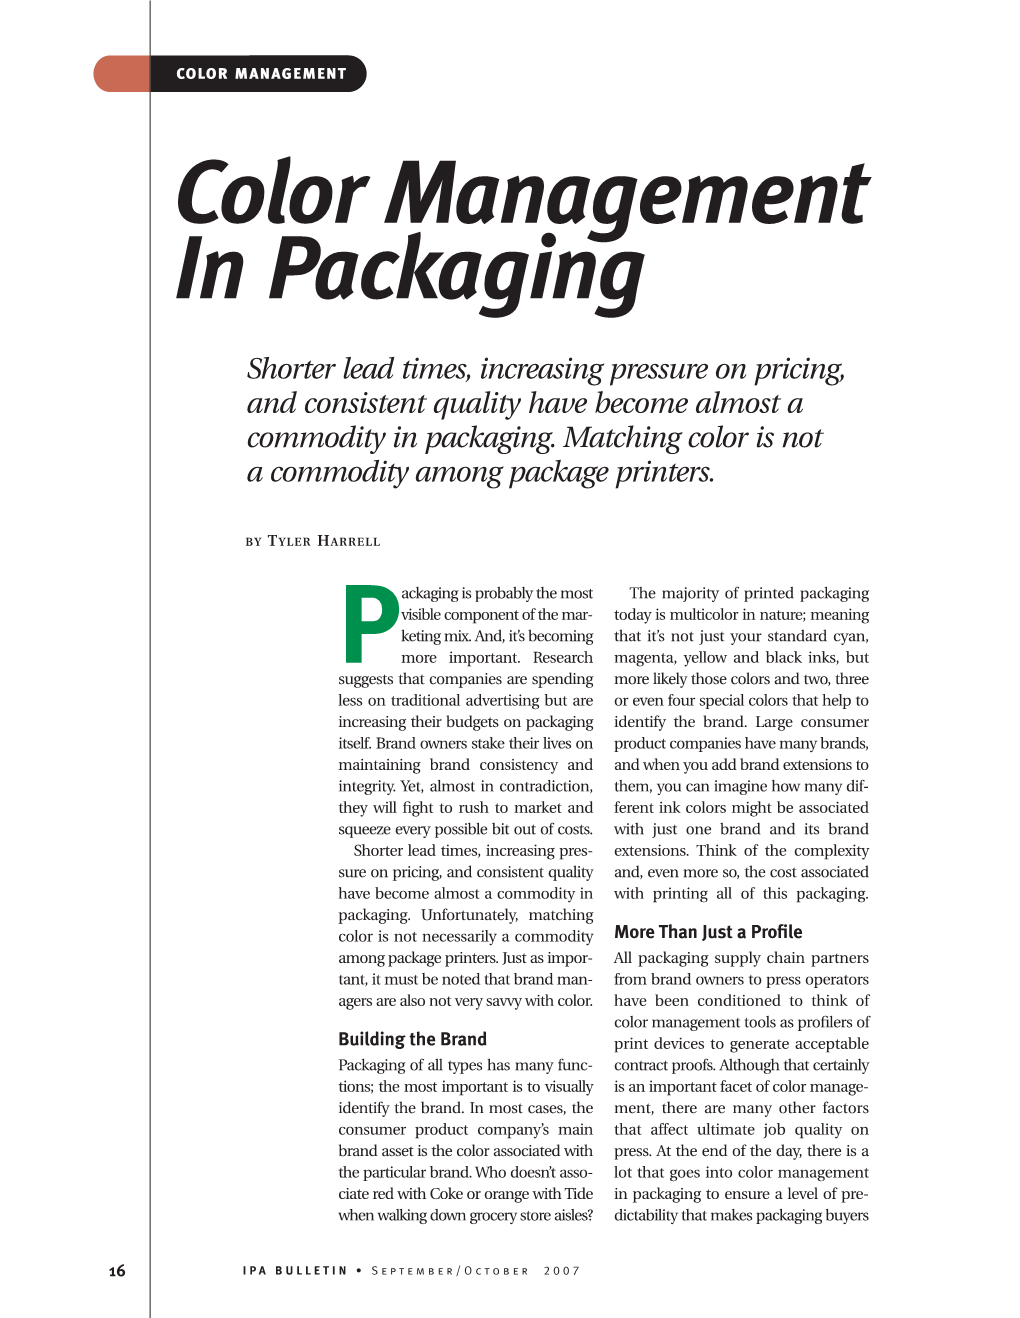 Color Management in Packaging